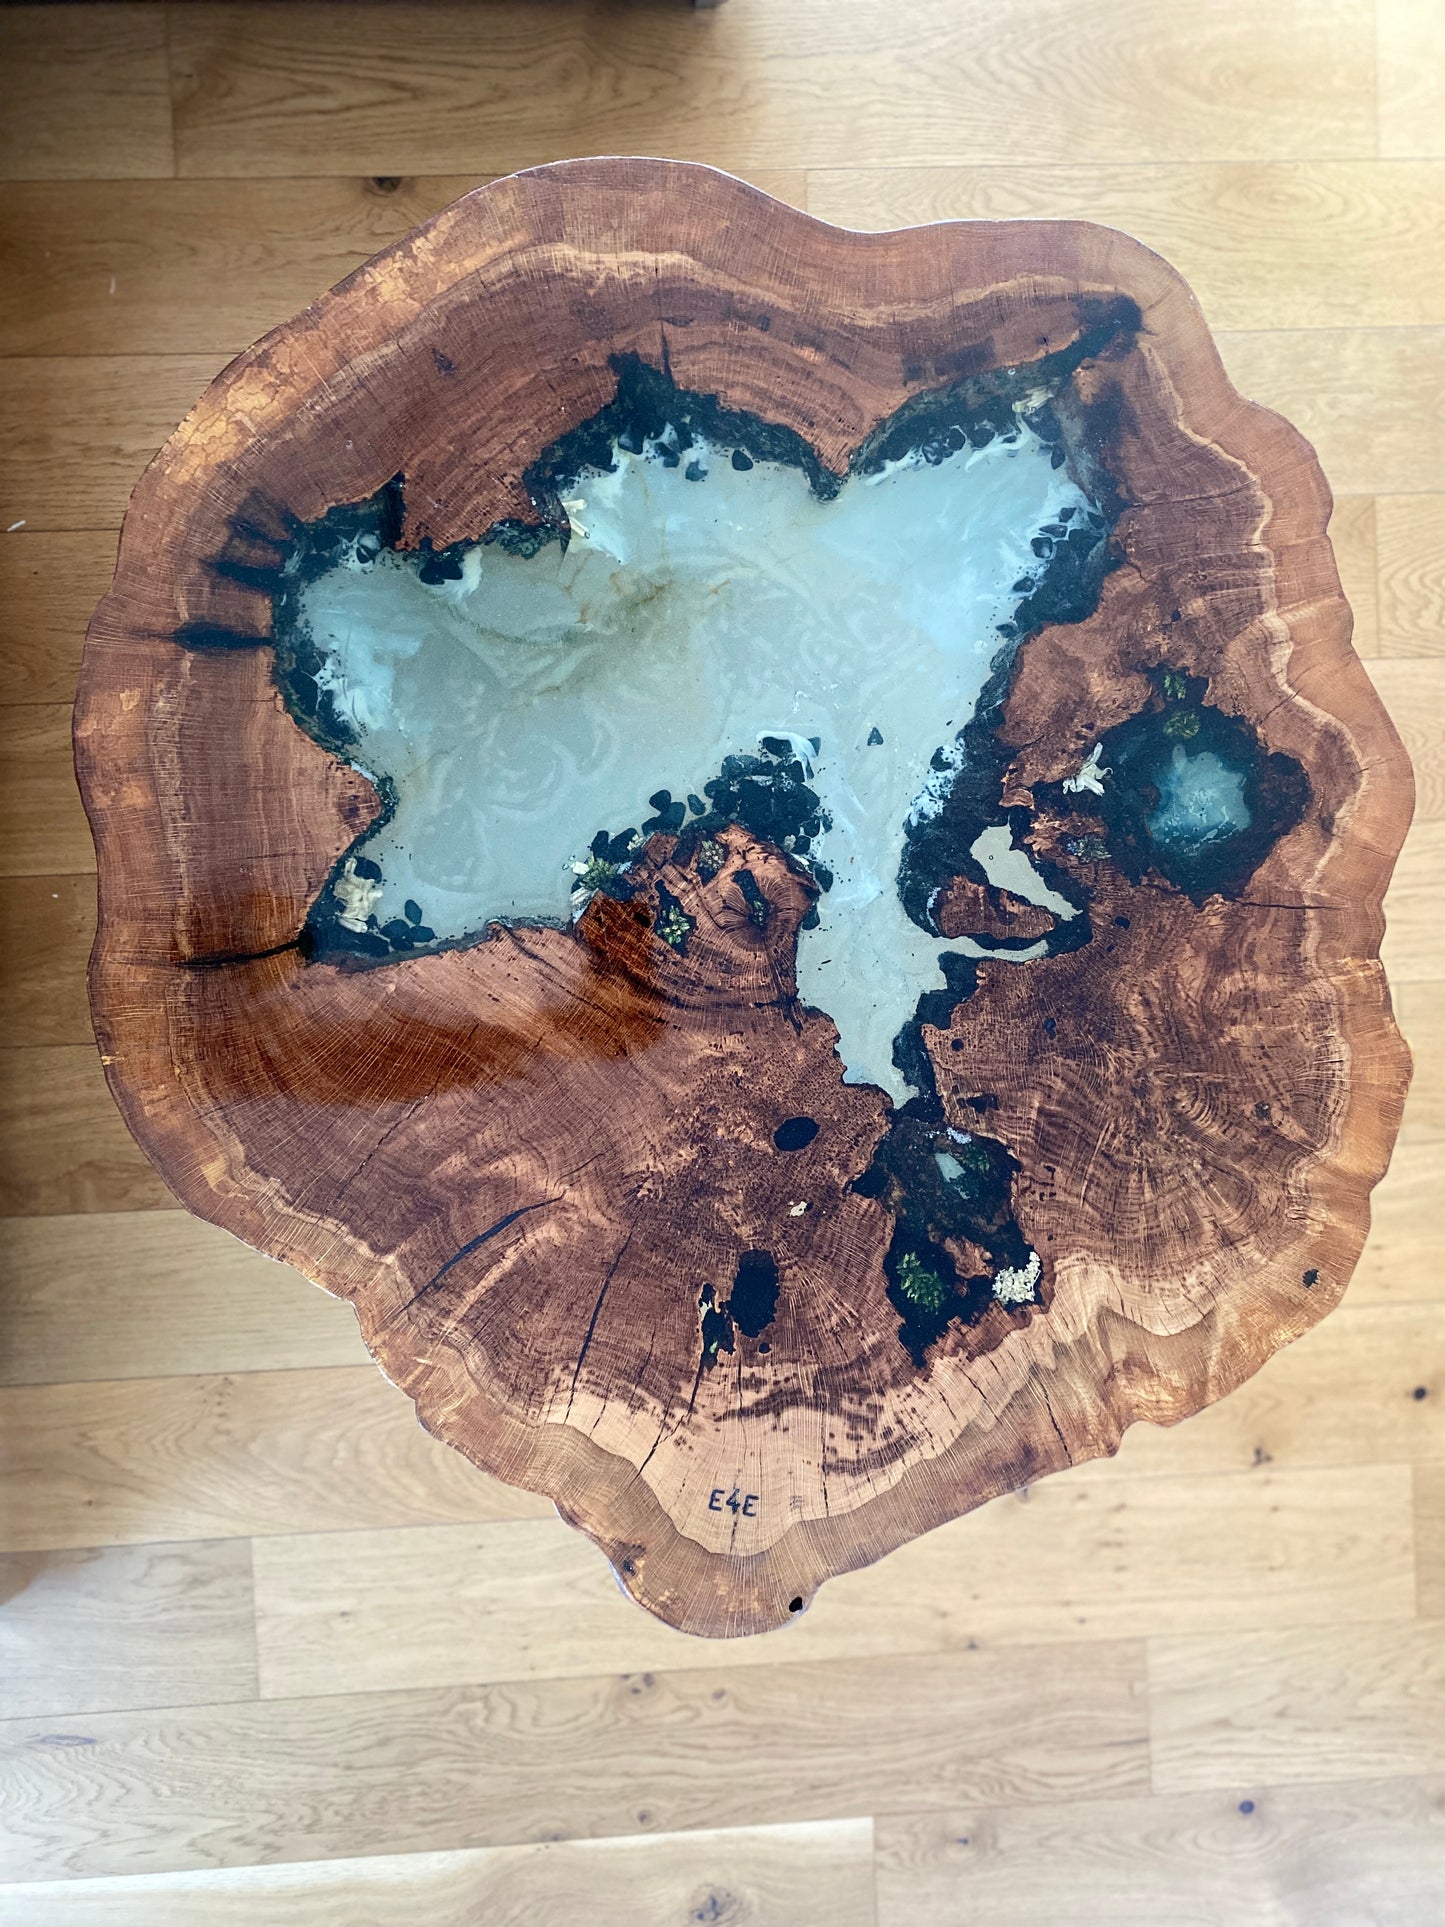 Coffee table made of maple wood and epoxy resin